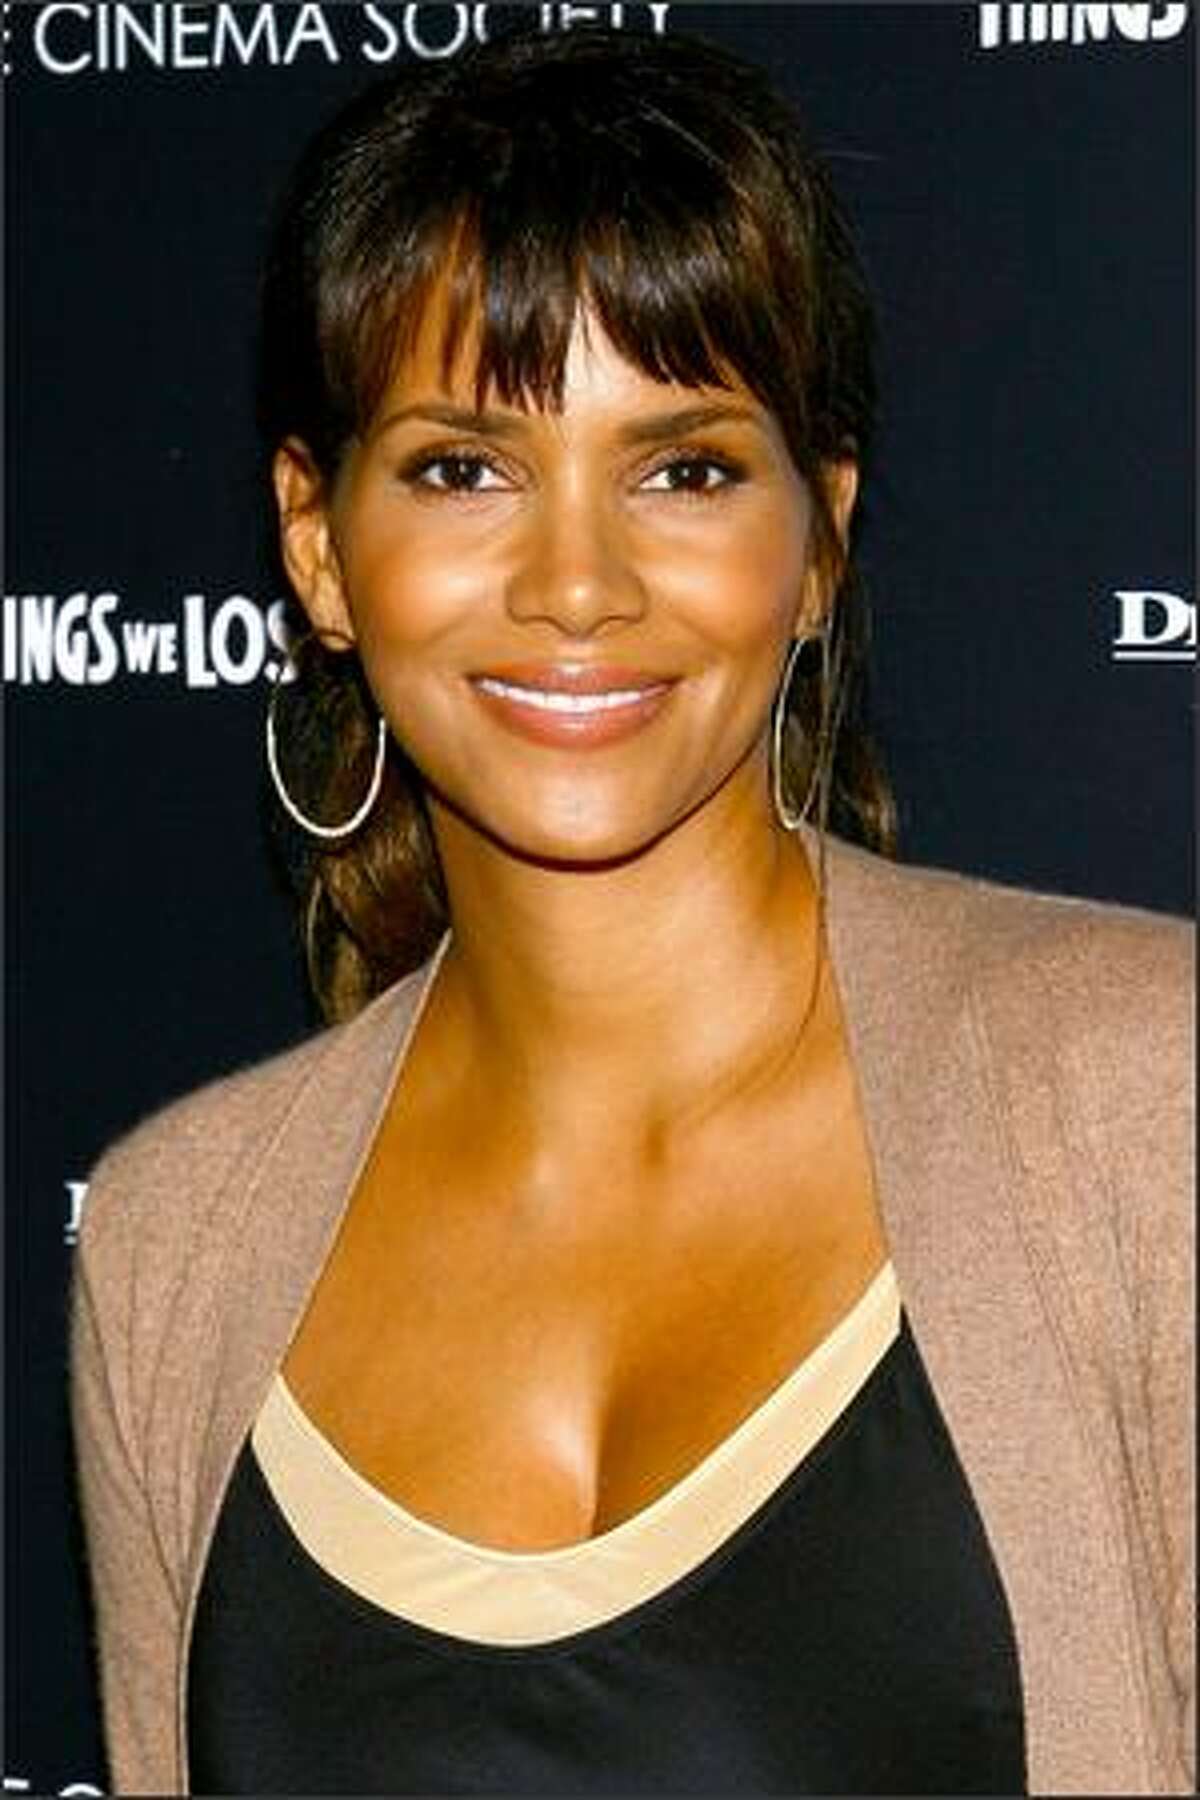 Actress Halle Berry attends the premiere of "Things We Lost In The Fire" presented by The Cinema Society in New York City.